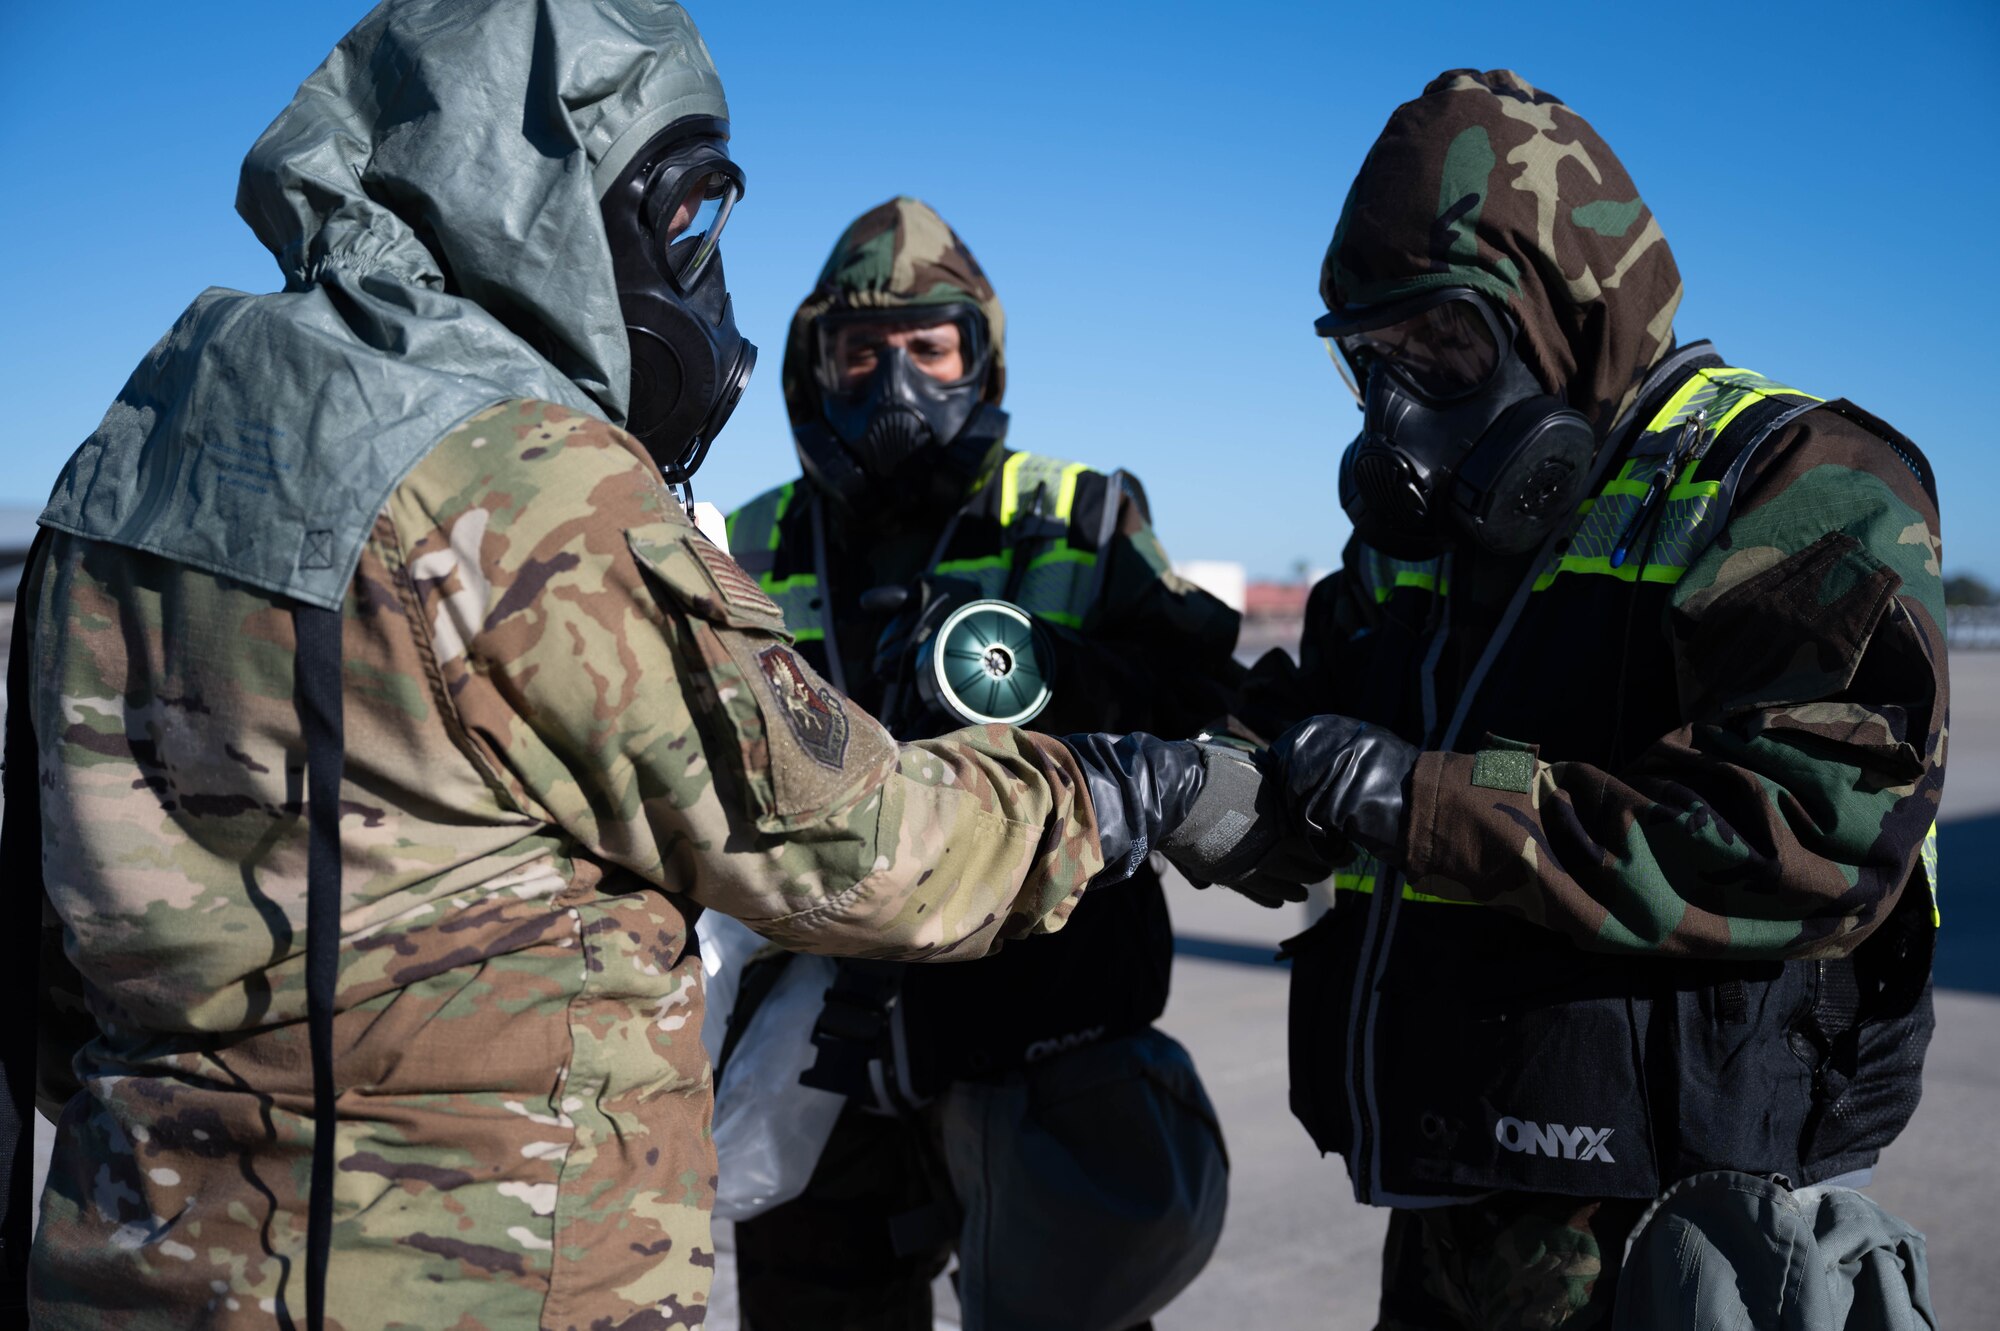 Citizen Airmen from the 927th Air Refueling Wing, MacDill Air Force Base, Fla., simulate removing contaminated equipment and clothing in a decontamination line Jan. 8, 2023. Maintaining readiness is a top priority during the unit training assembly weekends for Reserve Airmen at the 927th ARW. (U.S. Air Force photo by Staff Sgt. Alexis Suarez)